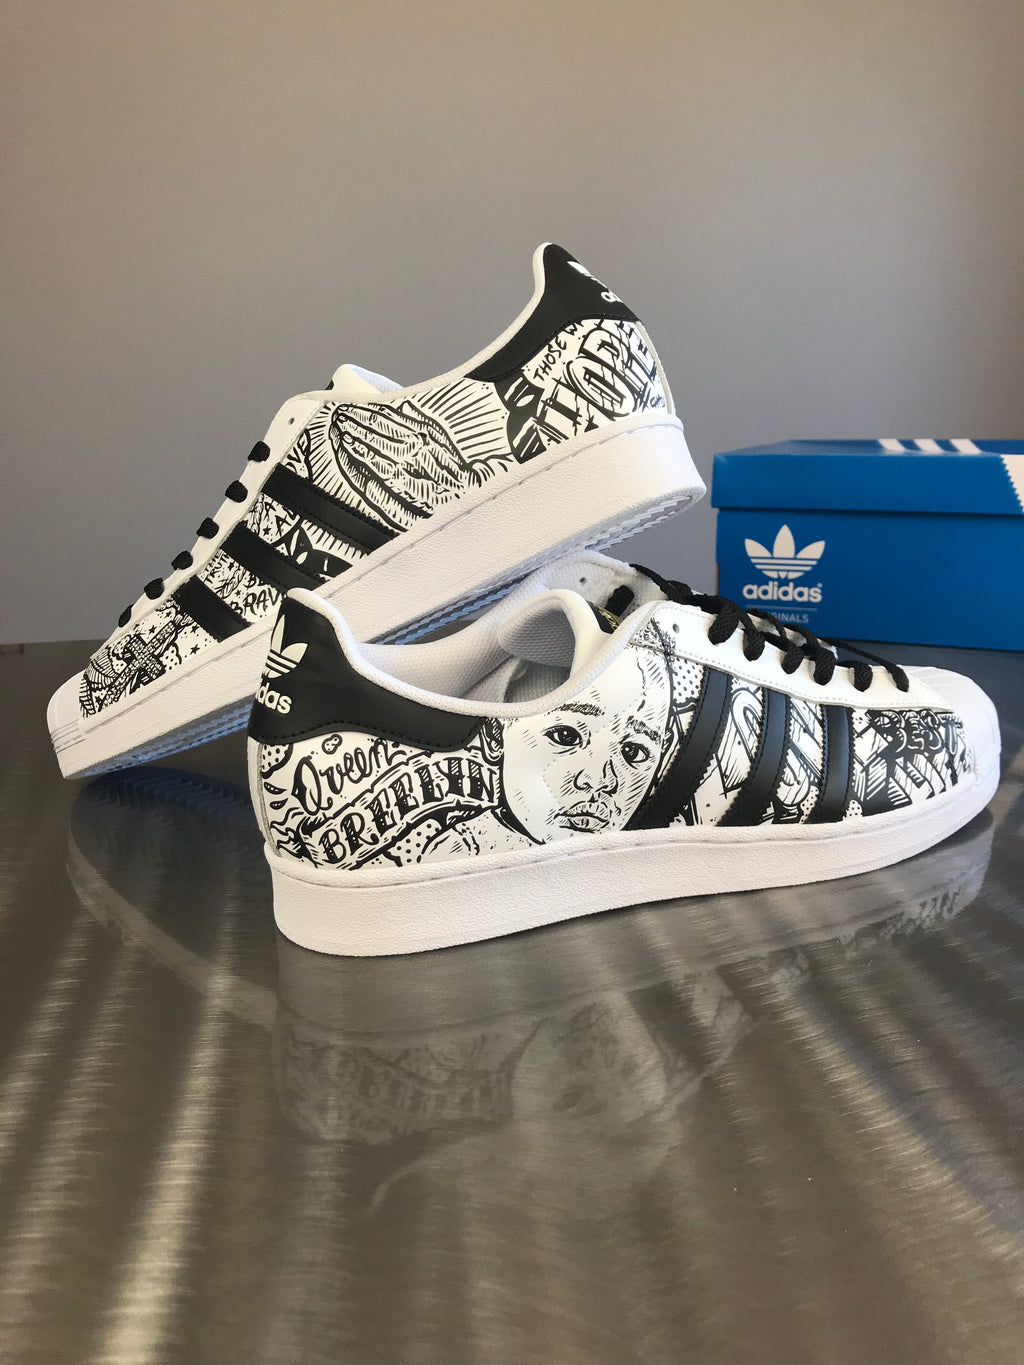 Cant Stop - Adidas Superstar shoes – chadcantcolor